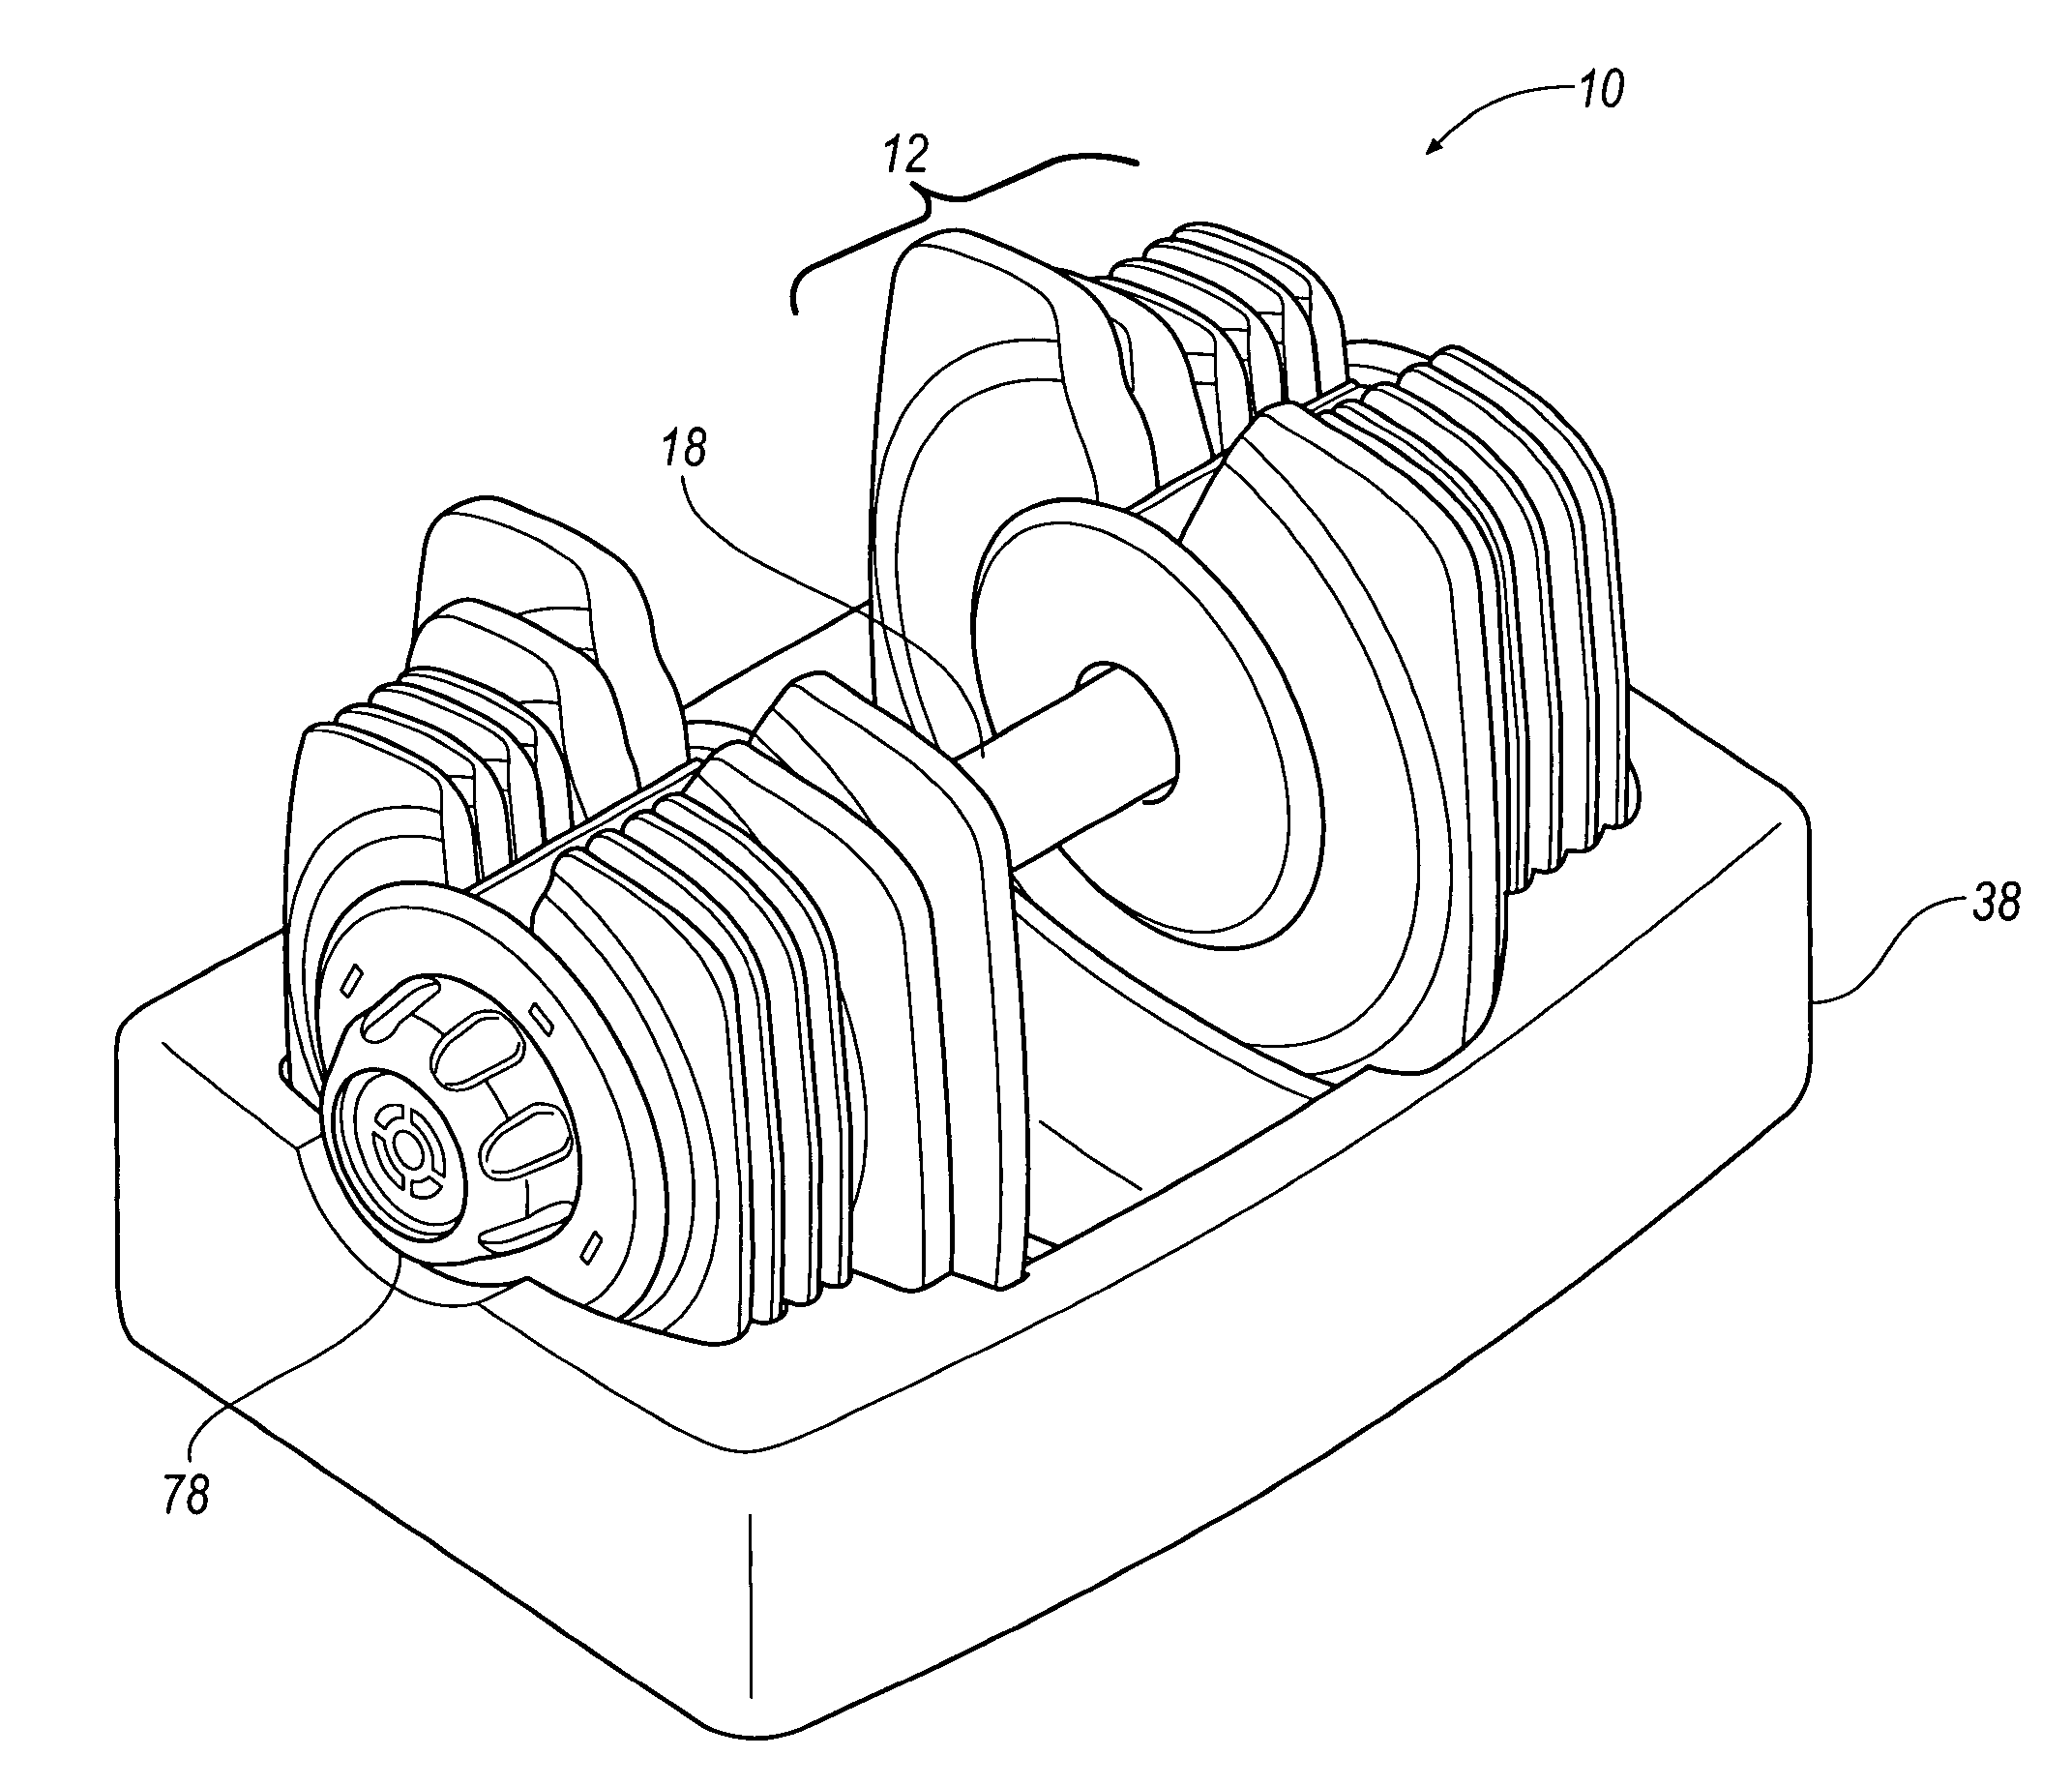 Weight-training apparatus having selectable weight plates